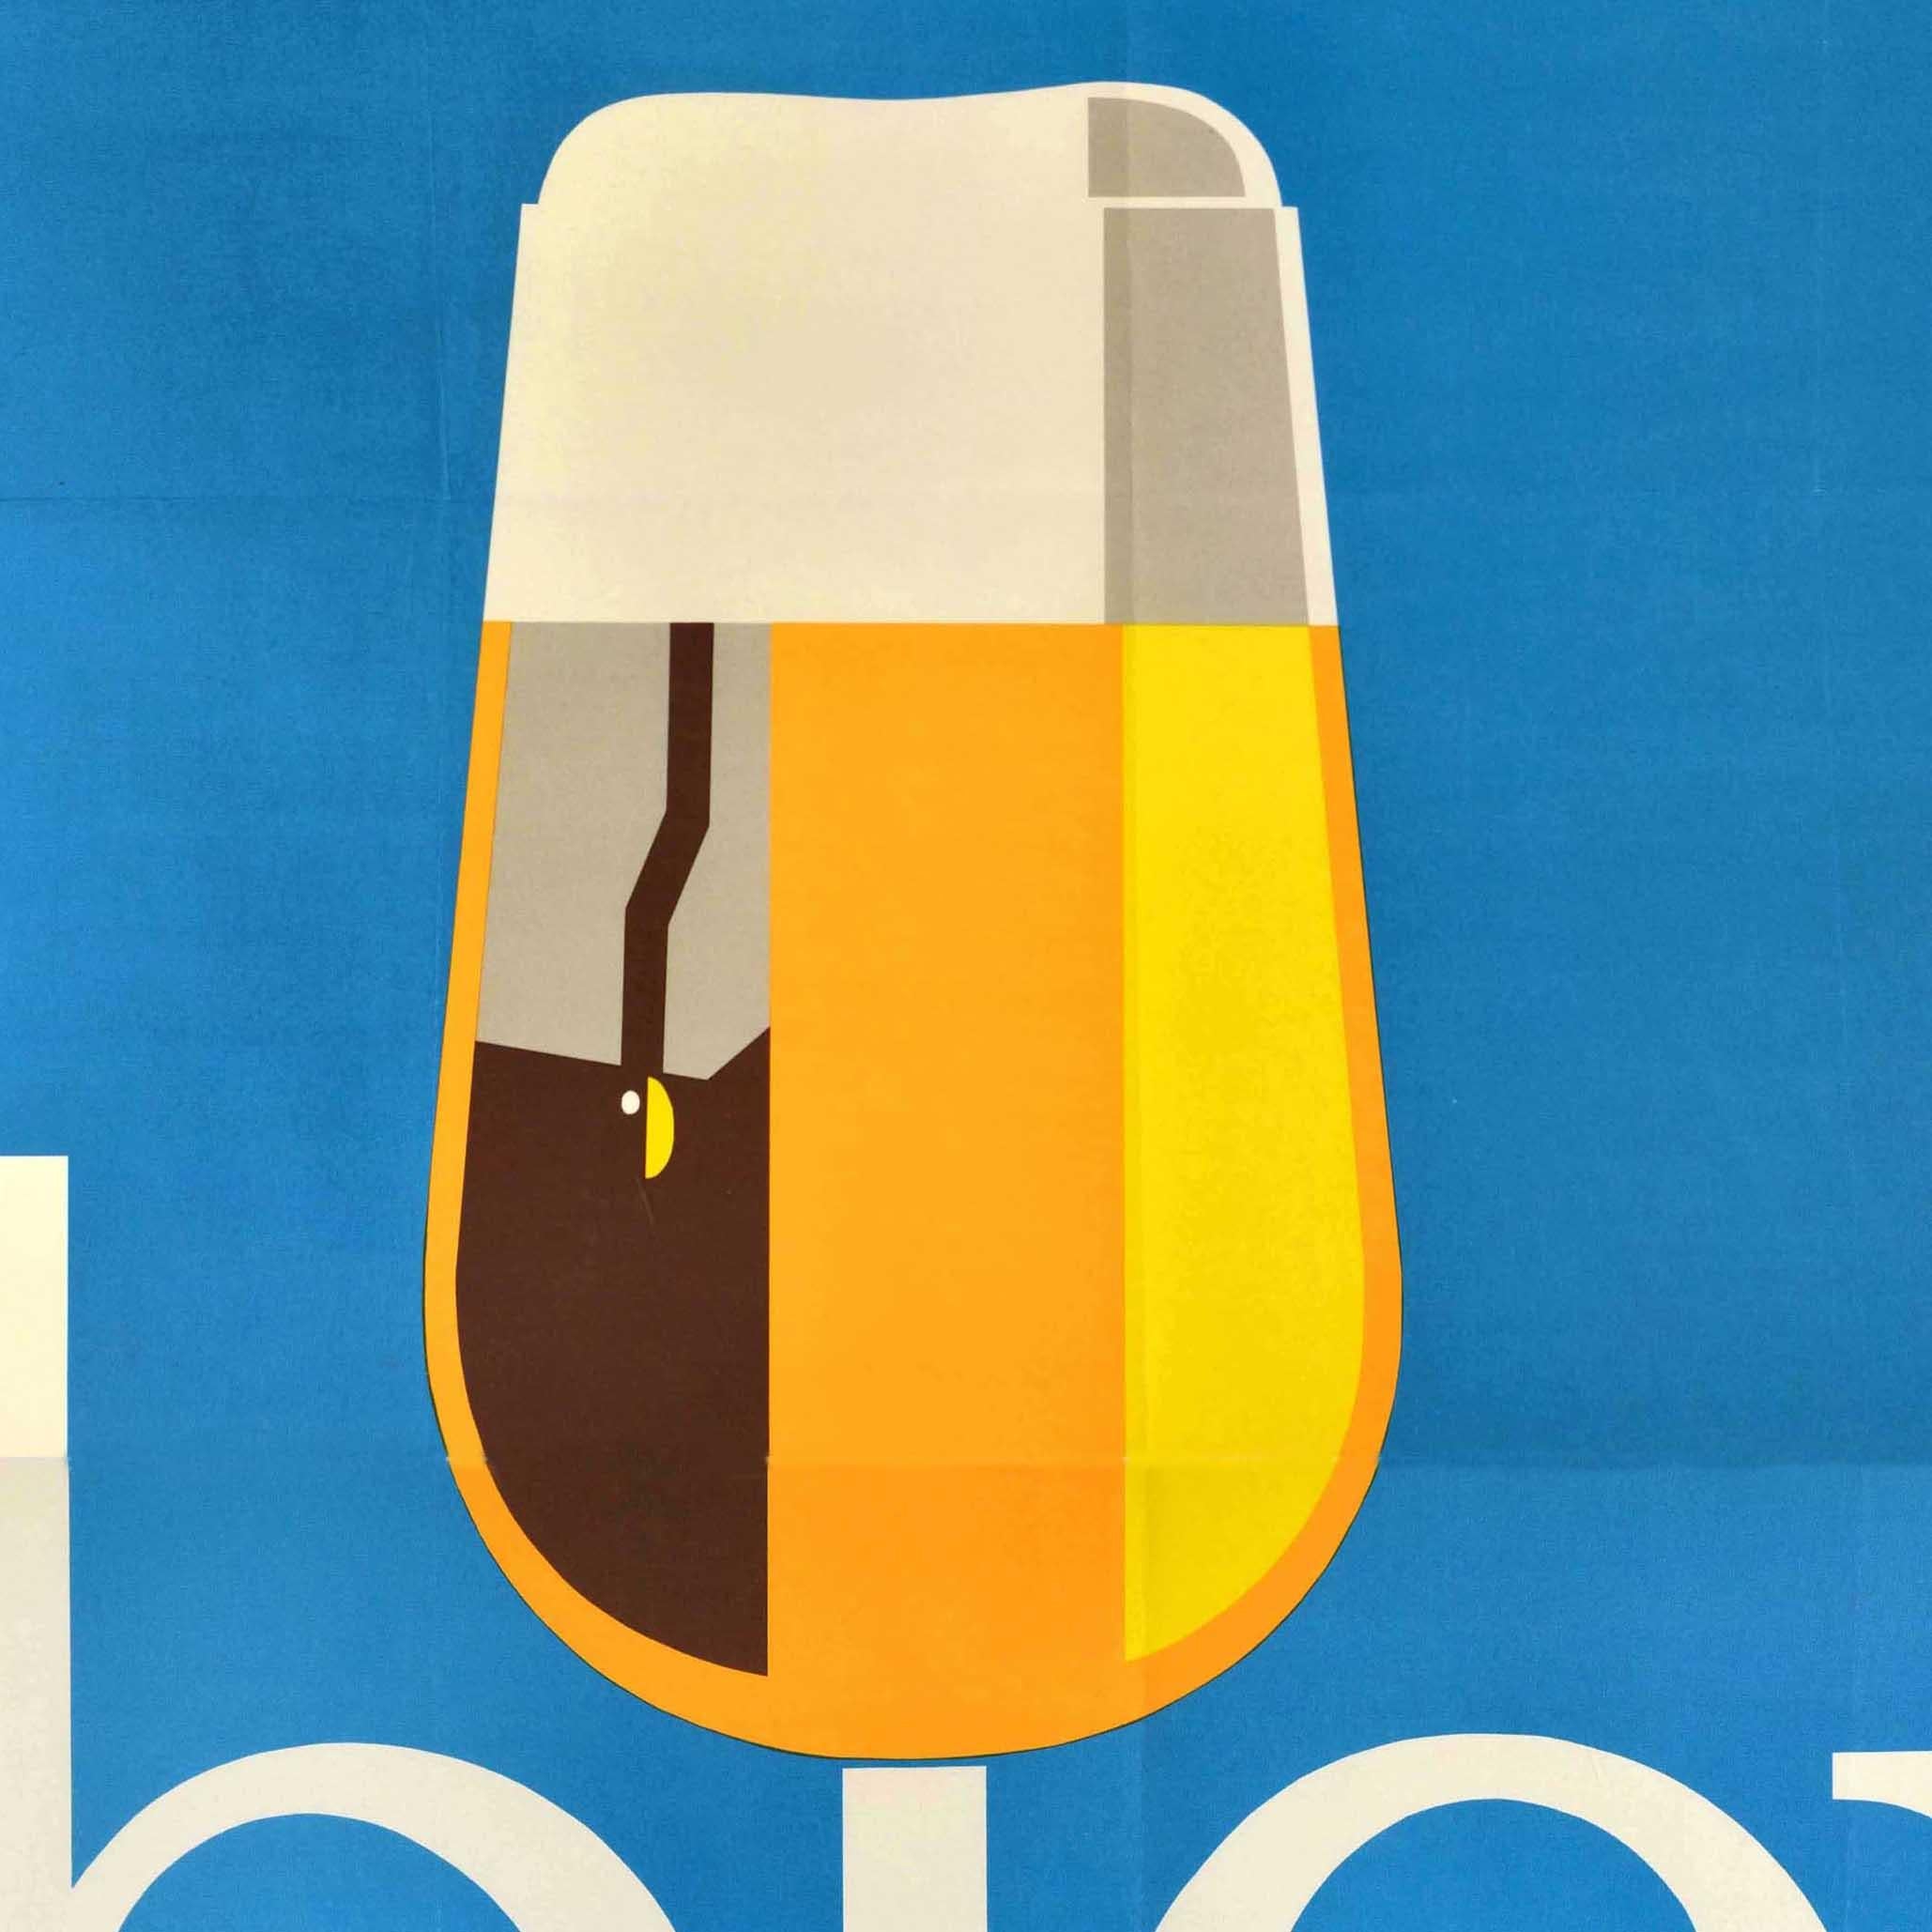 Original vintage advertising poster - Mass halten bier trinken / Drink beer moderately - featuring an image of a beer glass on the i of bier set against a blue background. Large size. Good condition, folds, creasing, ink stamp on reverse, 2 sheet